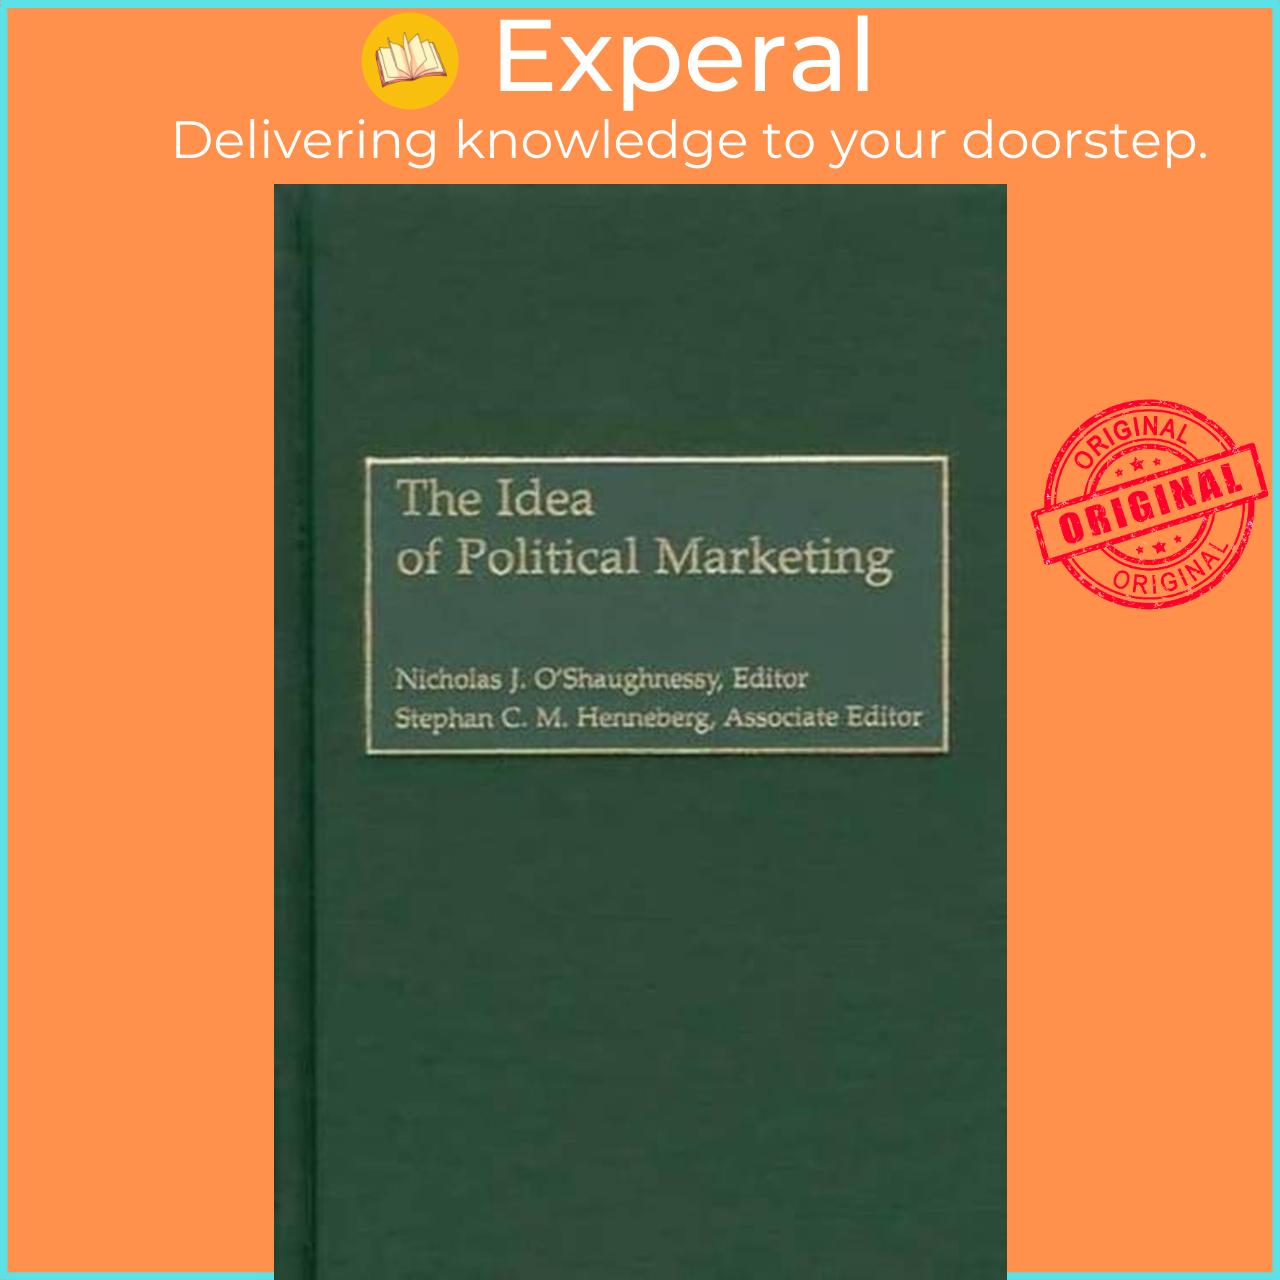 Sách - The Idea of Political Marketing by Stephan C.M. Henneberg (UK edition, hardcover)